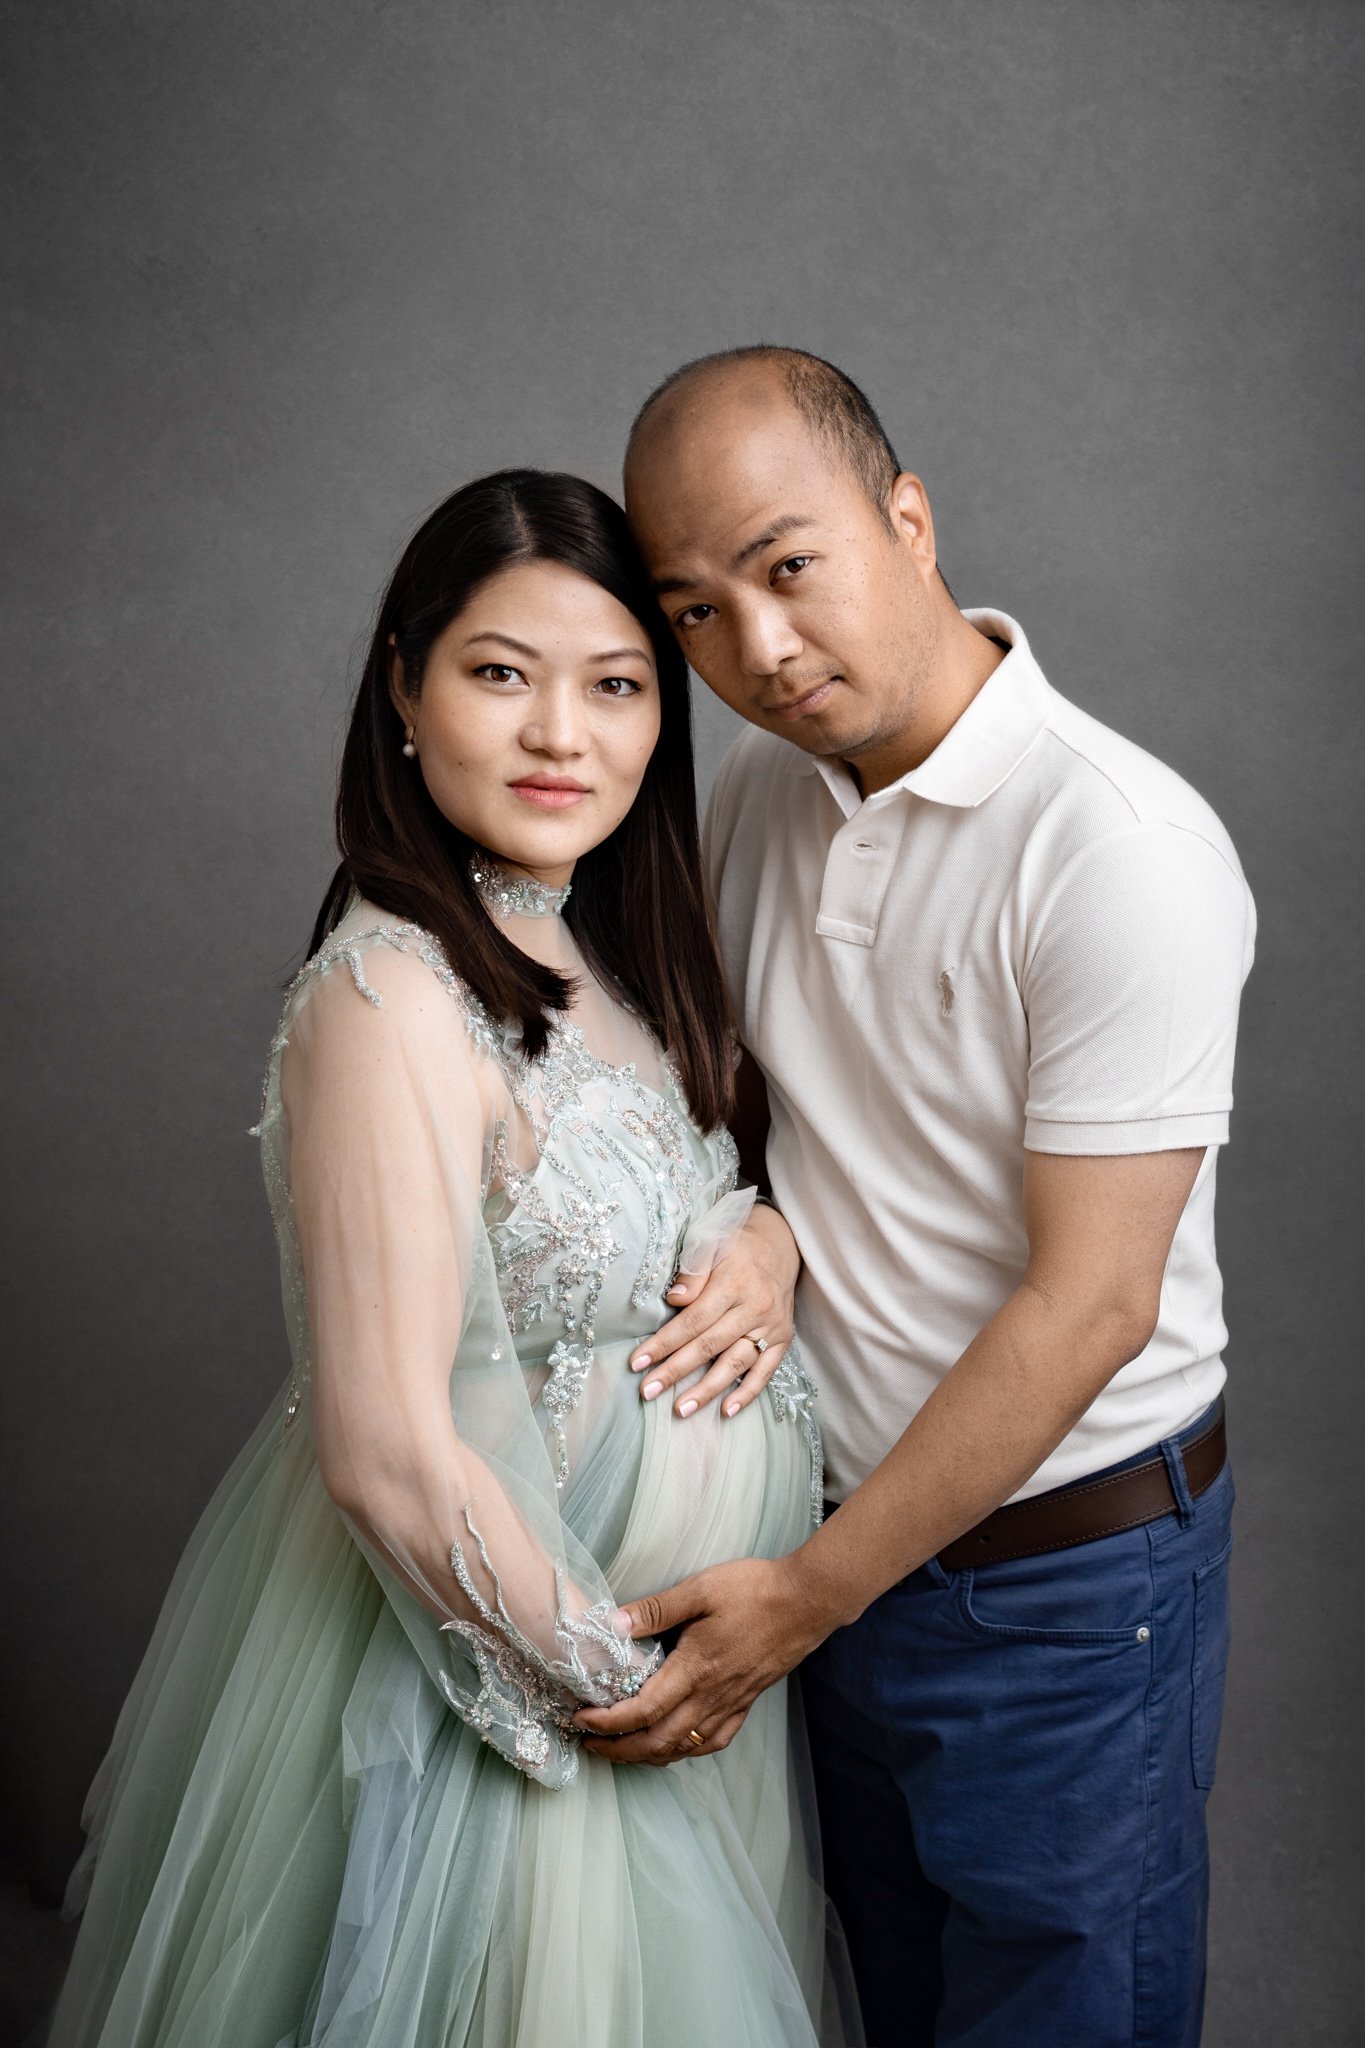 Maternity photography with your partner 